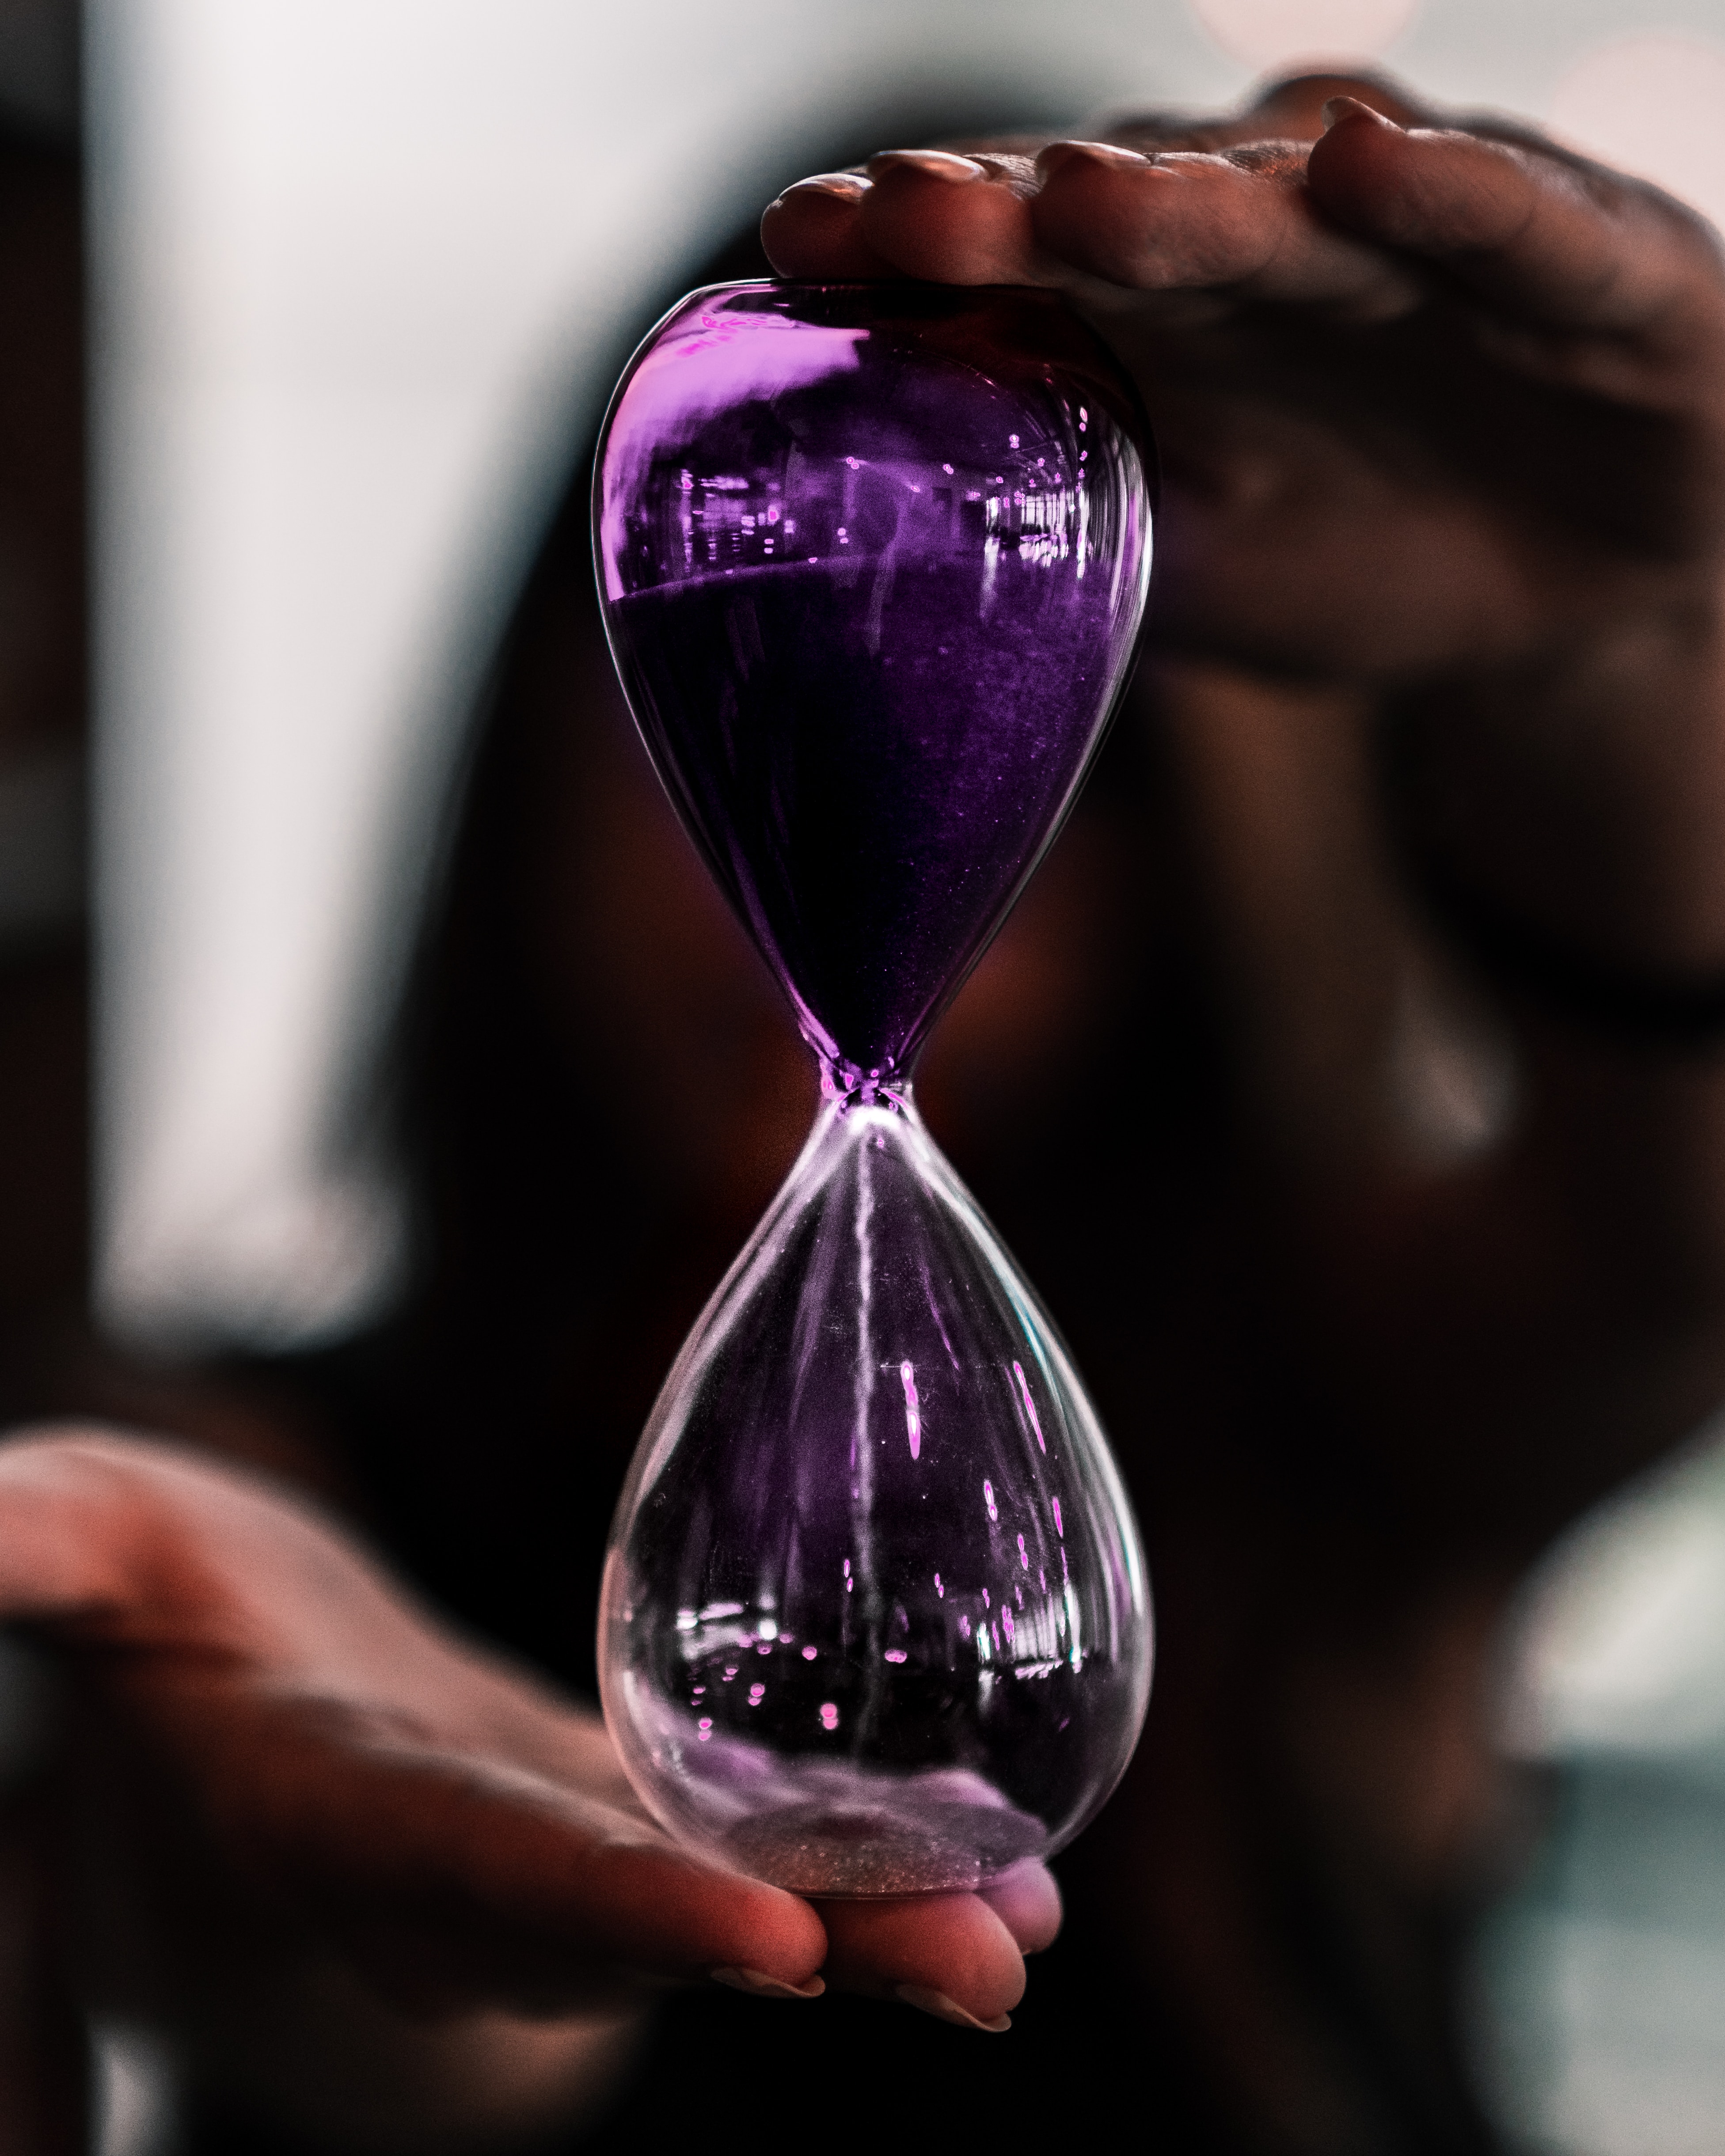 time, sand, miscellanea, miscellaneous, glass, hands, it's time, hourglass